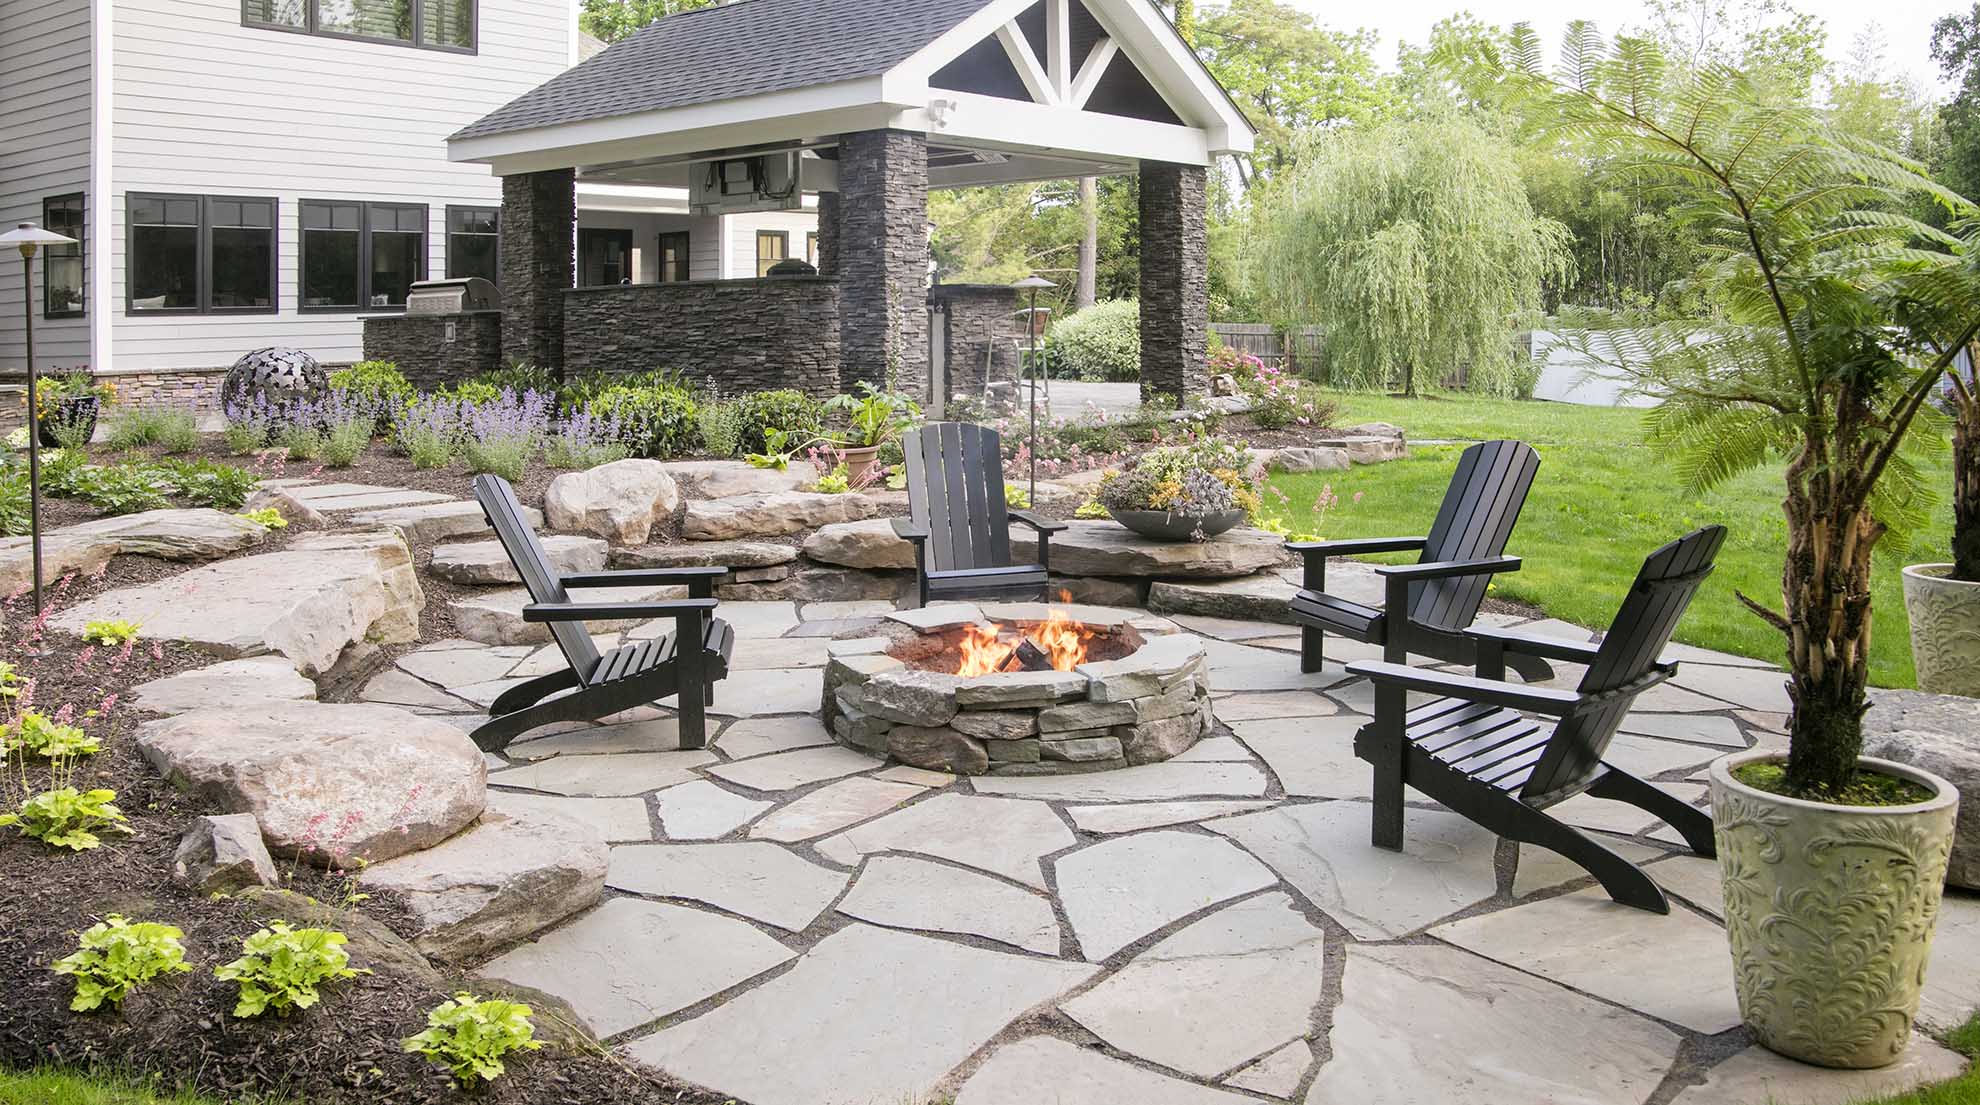 Get These 7 Things Right When Adding A Fire Pit | PLANT Design Group